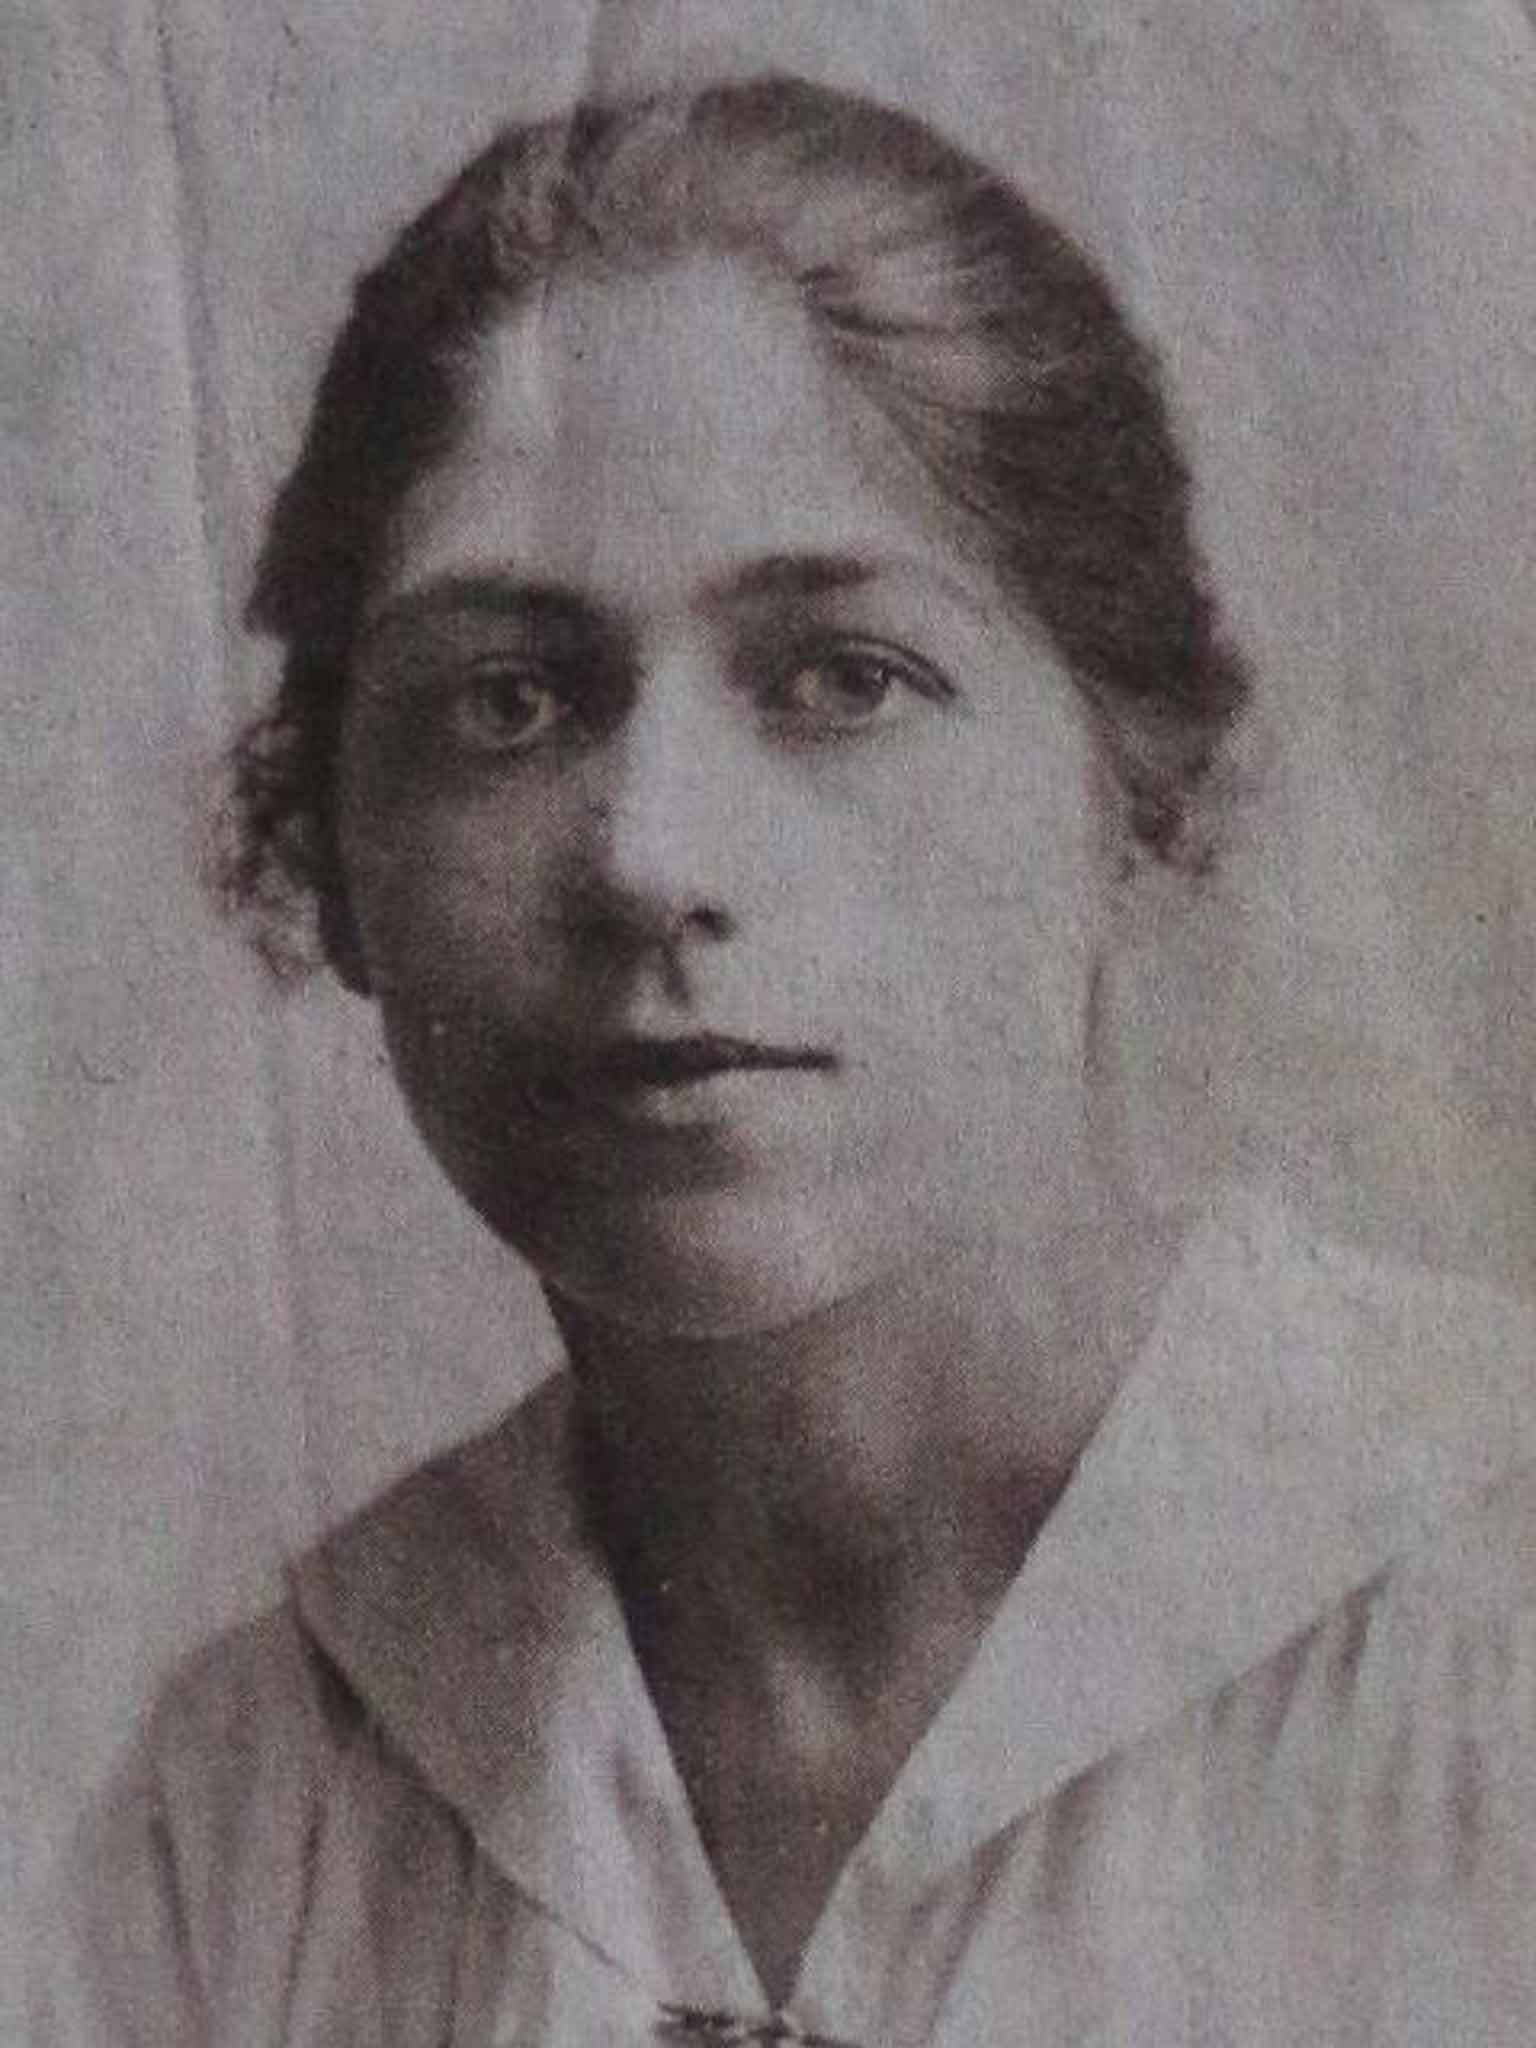 Lang at 20: she had been working making shirts for soldiers in the First World War